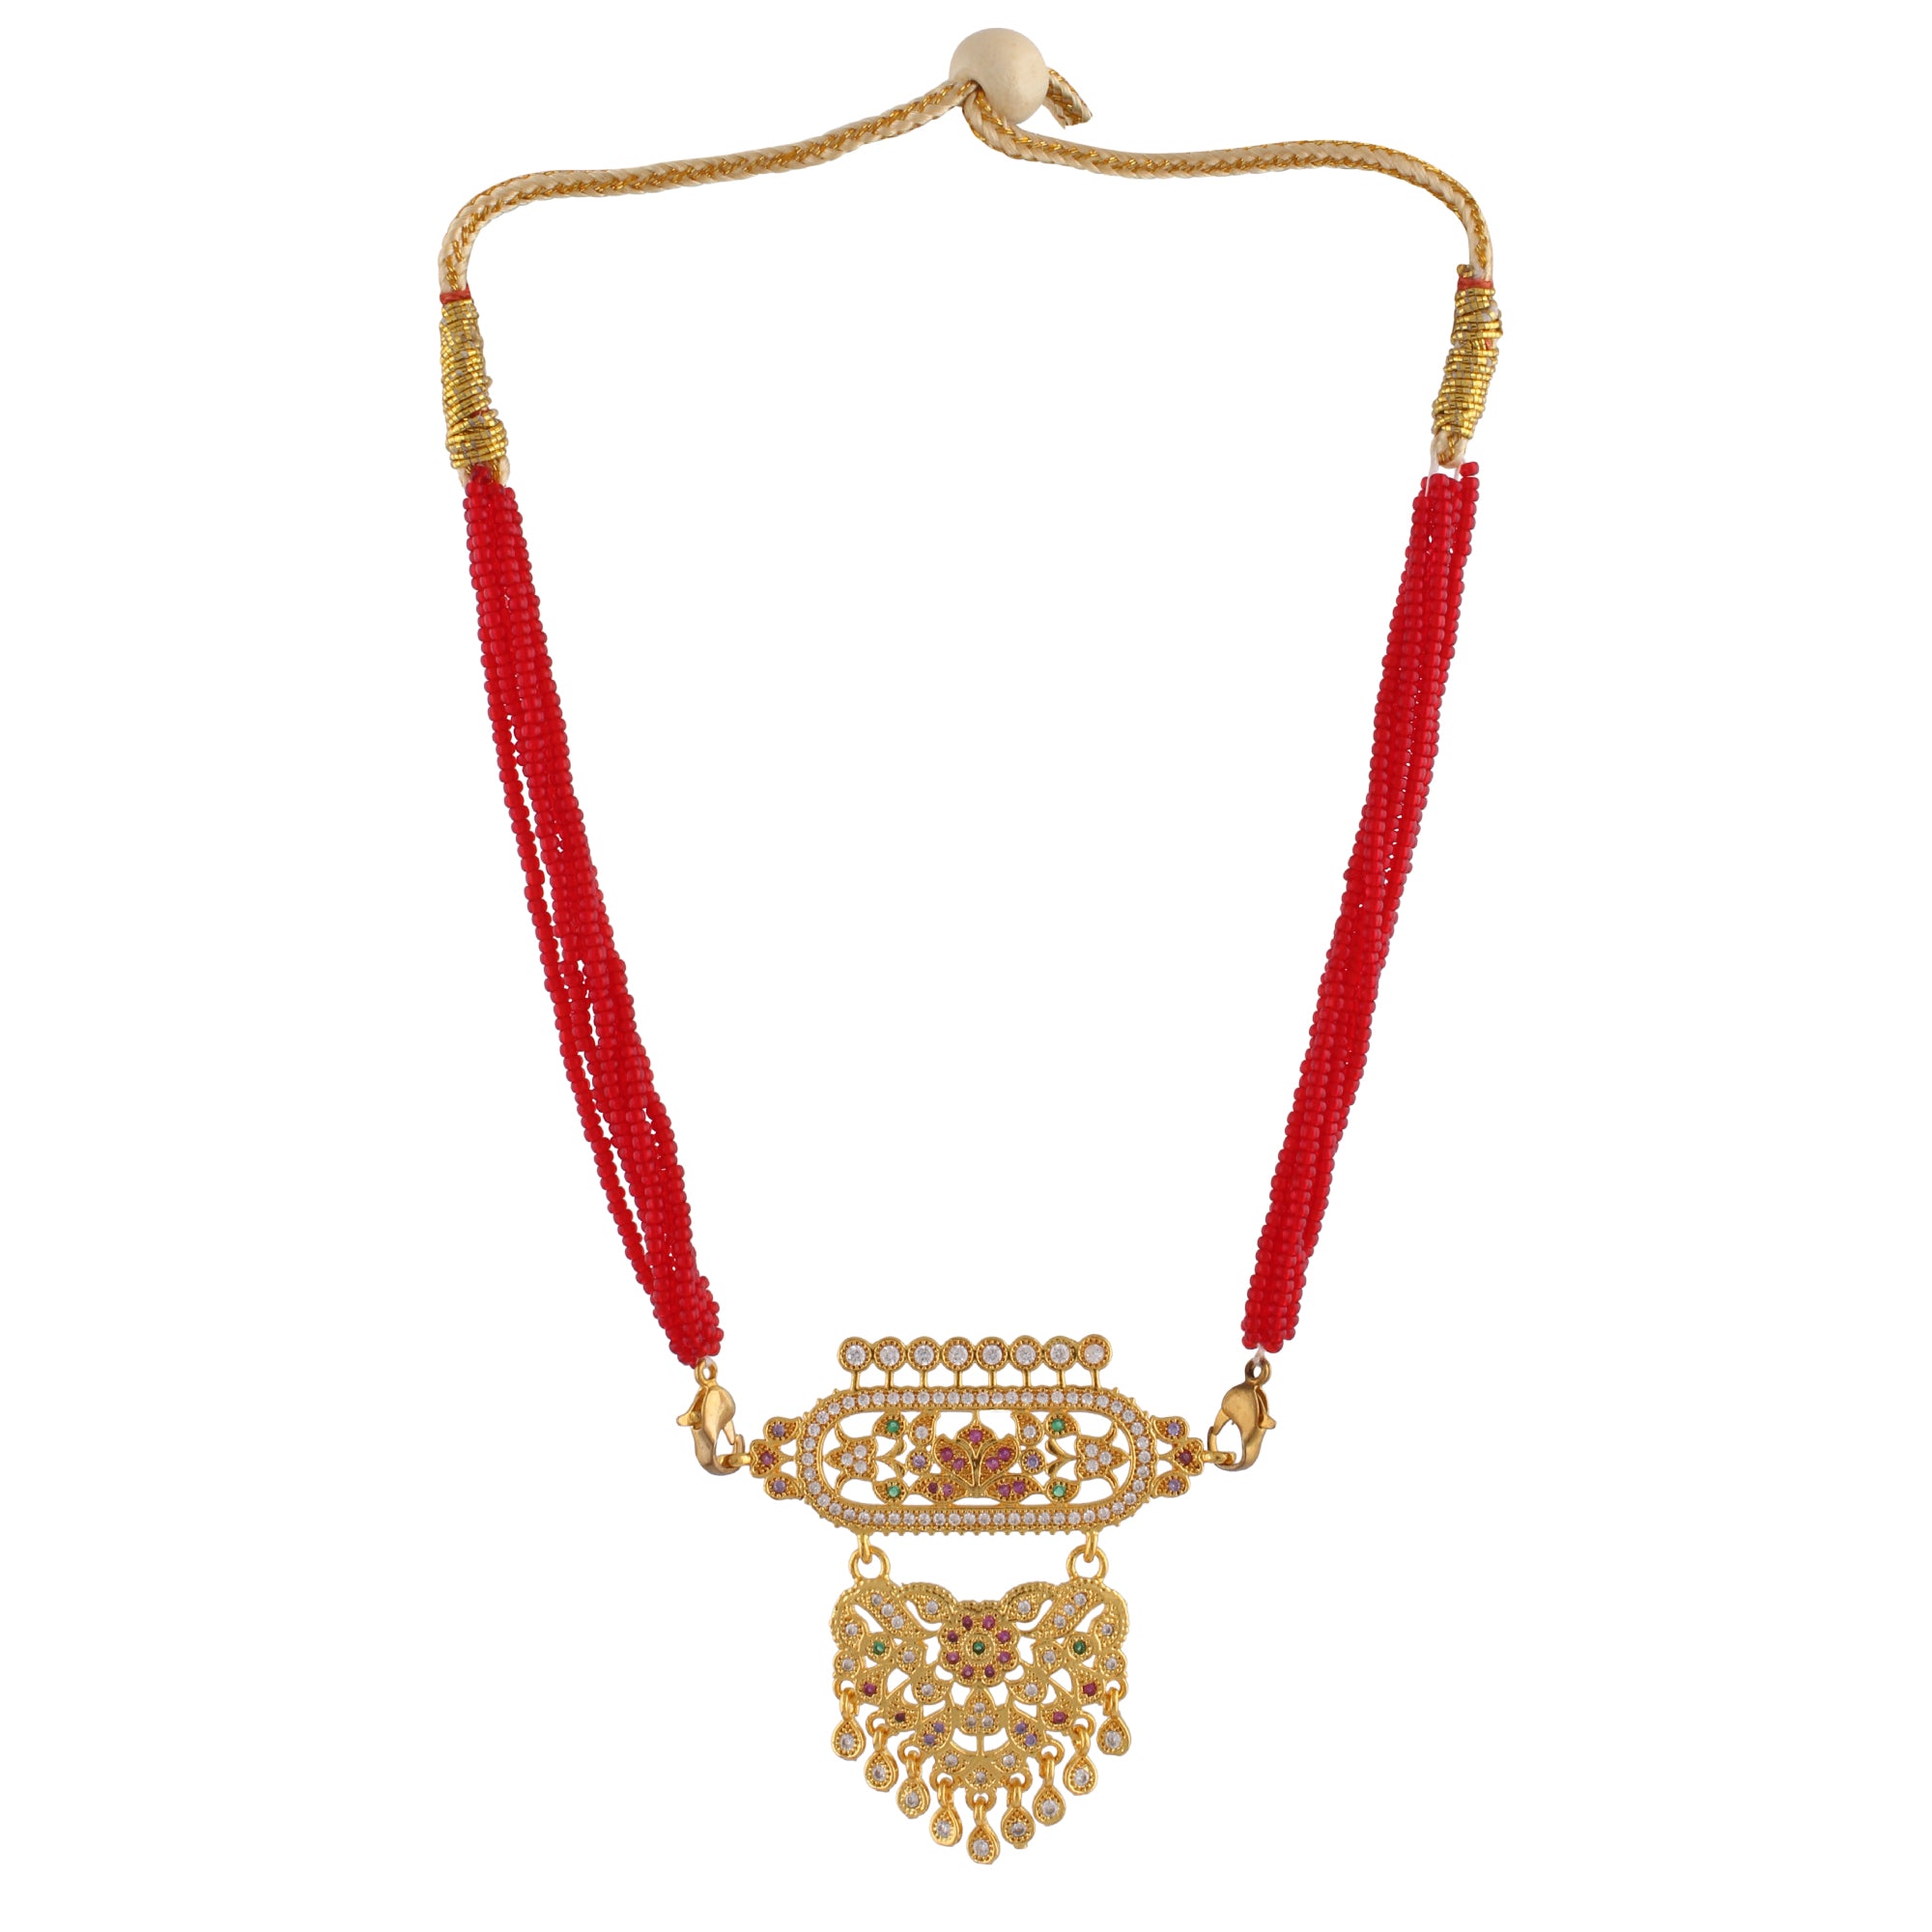 Indian Jewellery from Meira Jewellery:Rajasthani Jewellery,Rajasthani Rajputi Golden Micro Aad American Diamond multi strand for Women (Small Size) Red